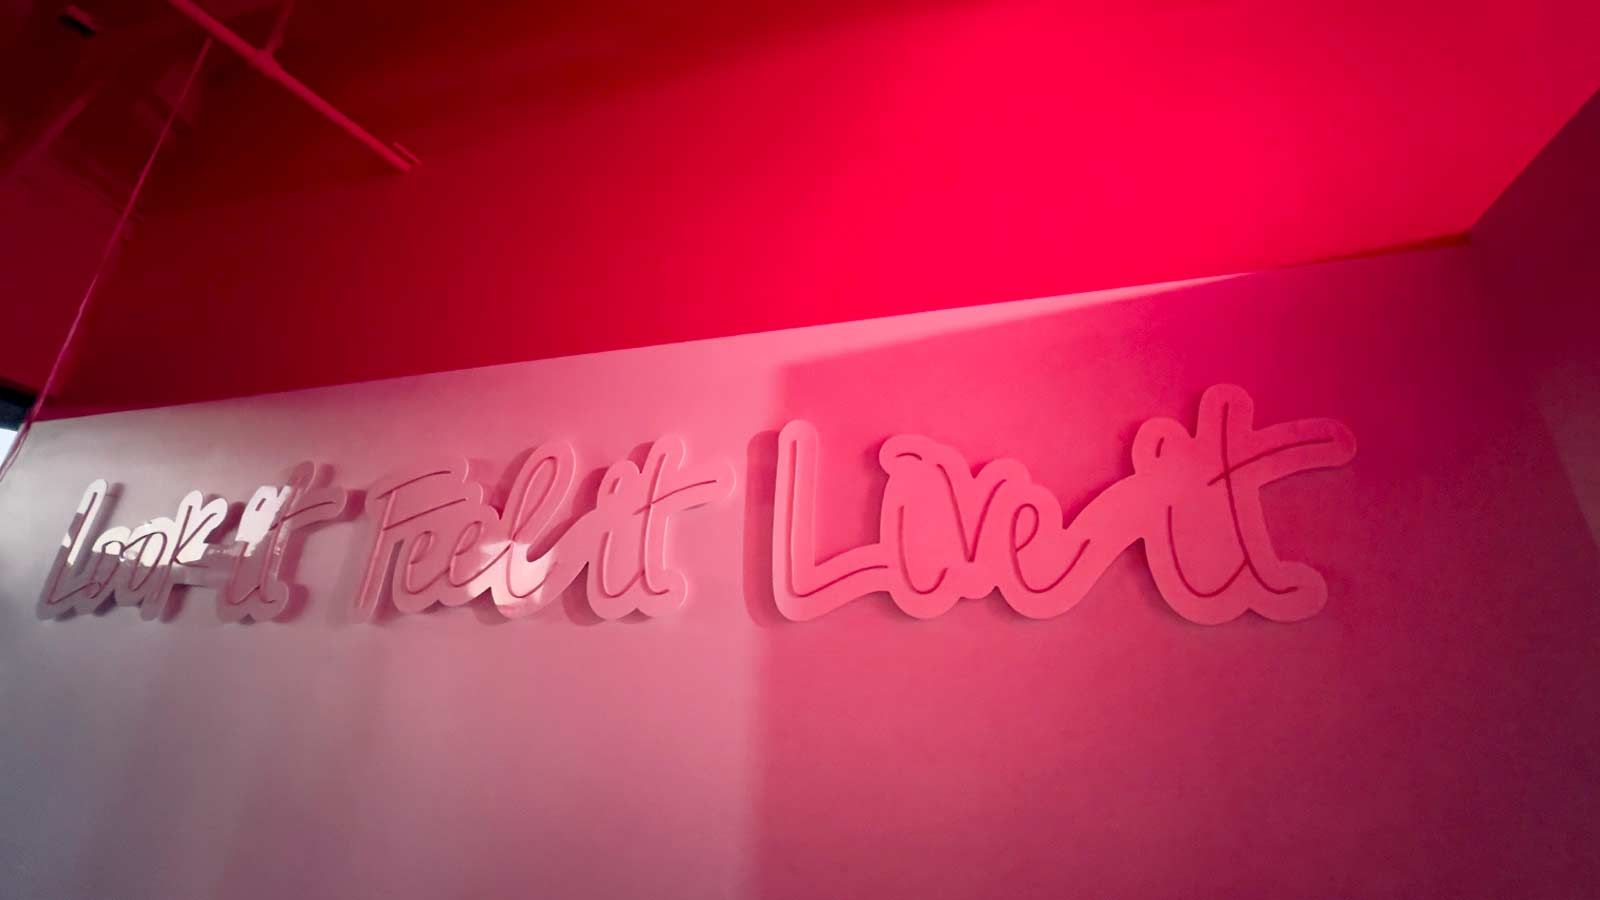 The Studio (MDR) light up sign mounted on the interior wall